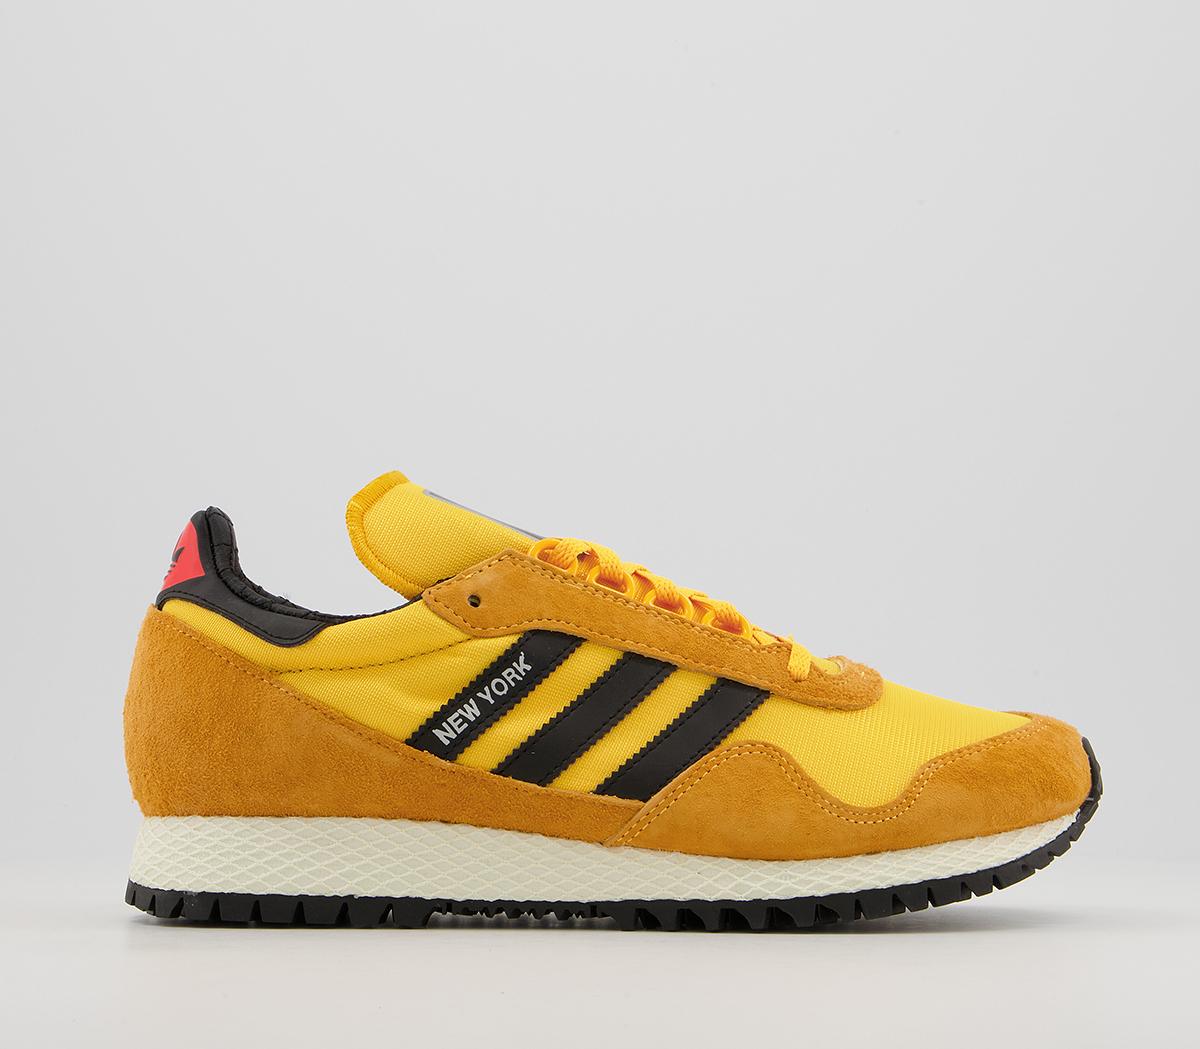 adidas New York Trainers Yellow White Black - His trainers